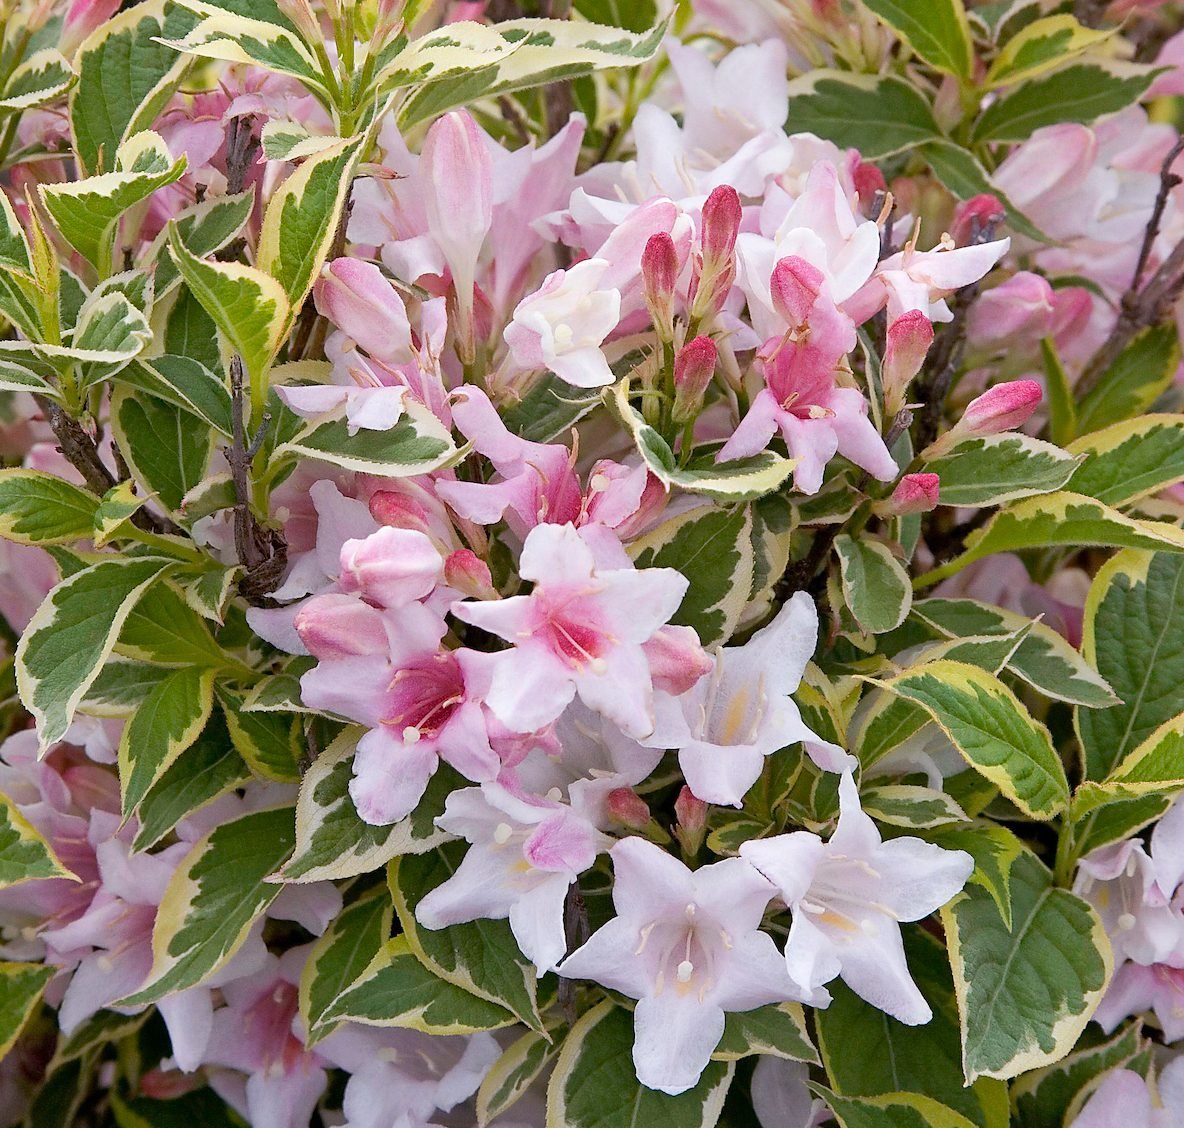 10 Dwarf Flowering Shrubs for Containers